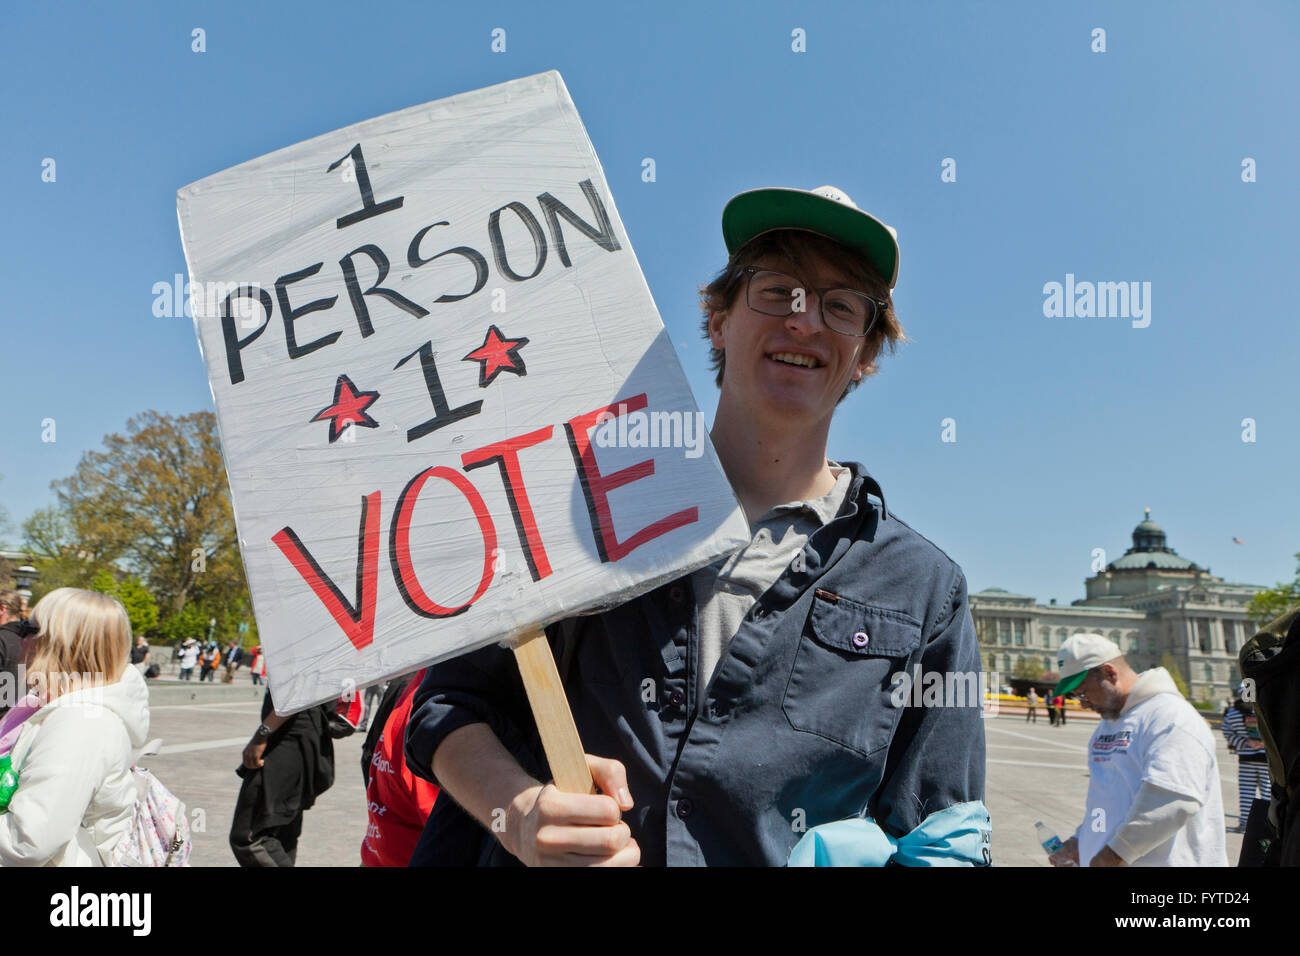 Liberal protester with 1 person 1 vote sign - Washington, DC USA Stock Photo